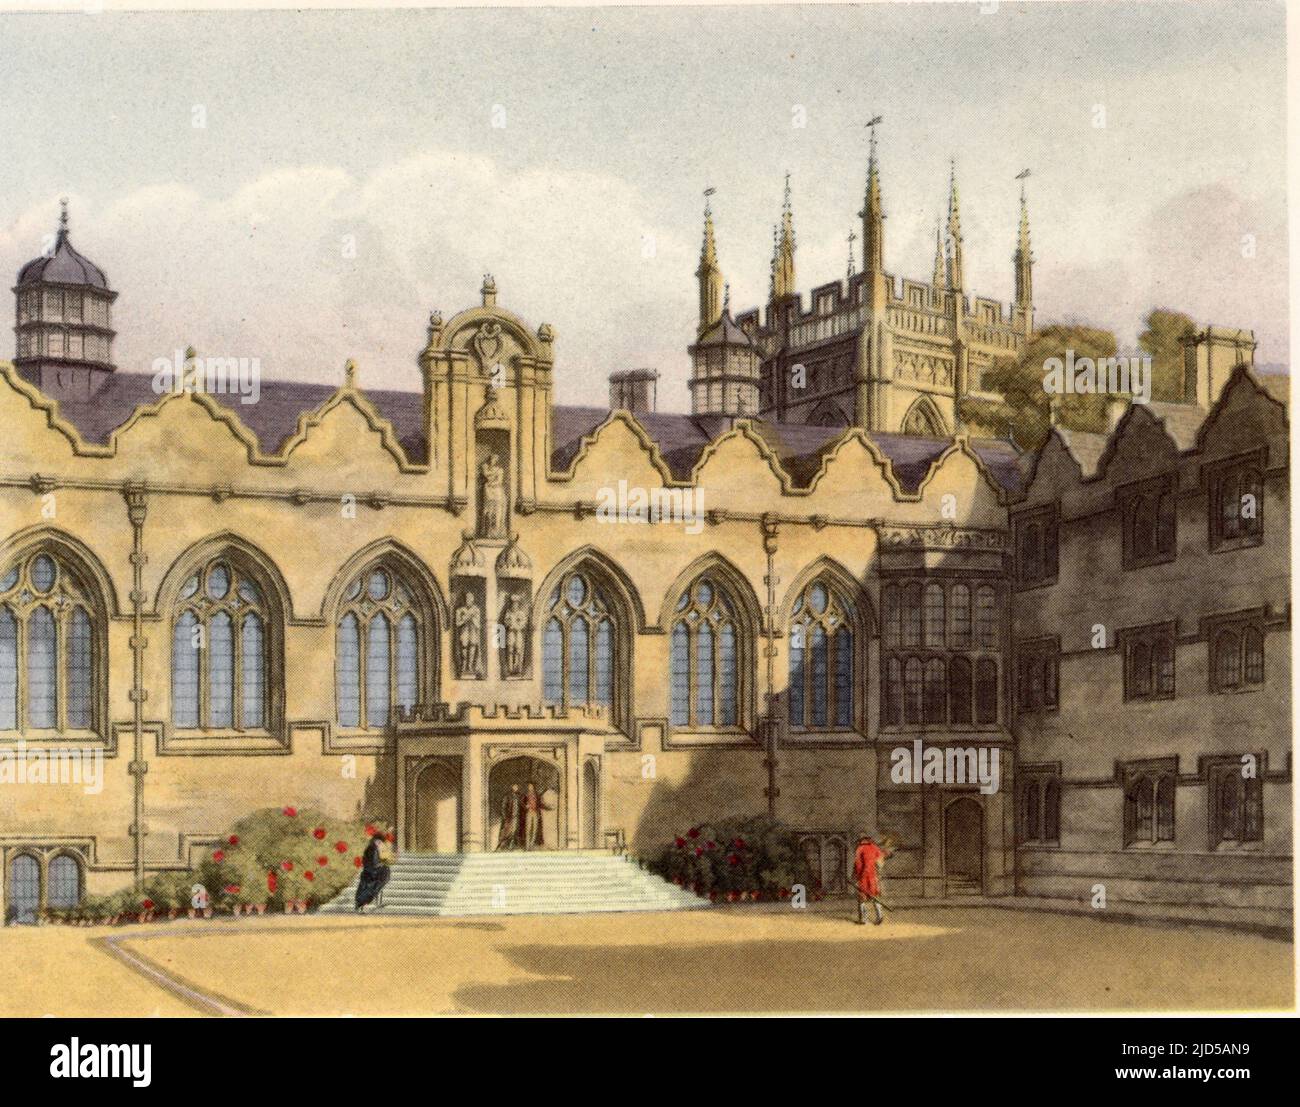 Oriel College, 1814. Oriel College is a constituent college of the University of Oxford, Oxford, England. Located in Oriel Square, the college is the oldest royal foundation in Oxford. A print from 'A History of the University of Oxford, its Colleges, Halls, and Public Buildings', published by Rudolph Ackermann, 1814. Ilustrated by Augustus Pugin, F. Mackenzie and others. Stock Photo